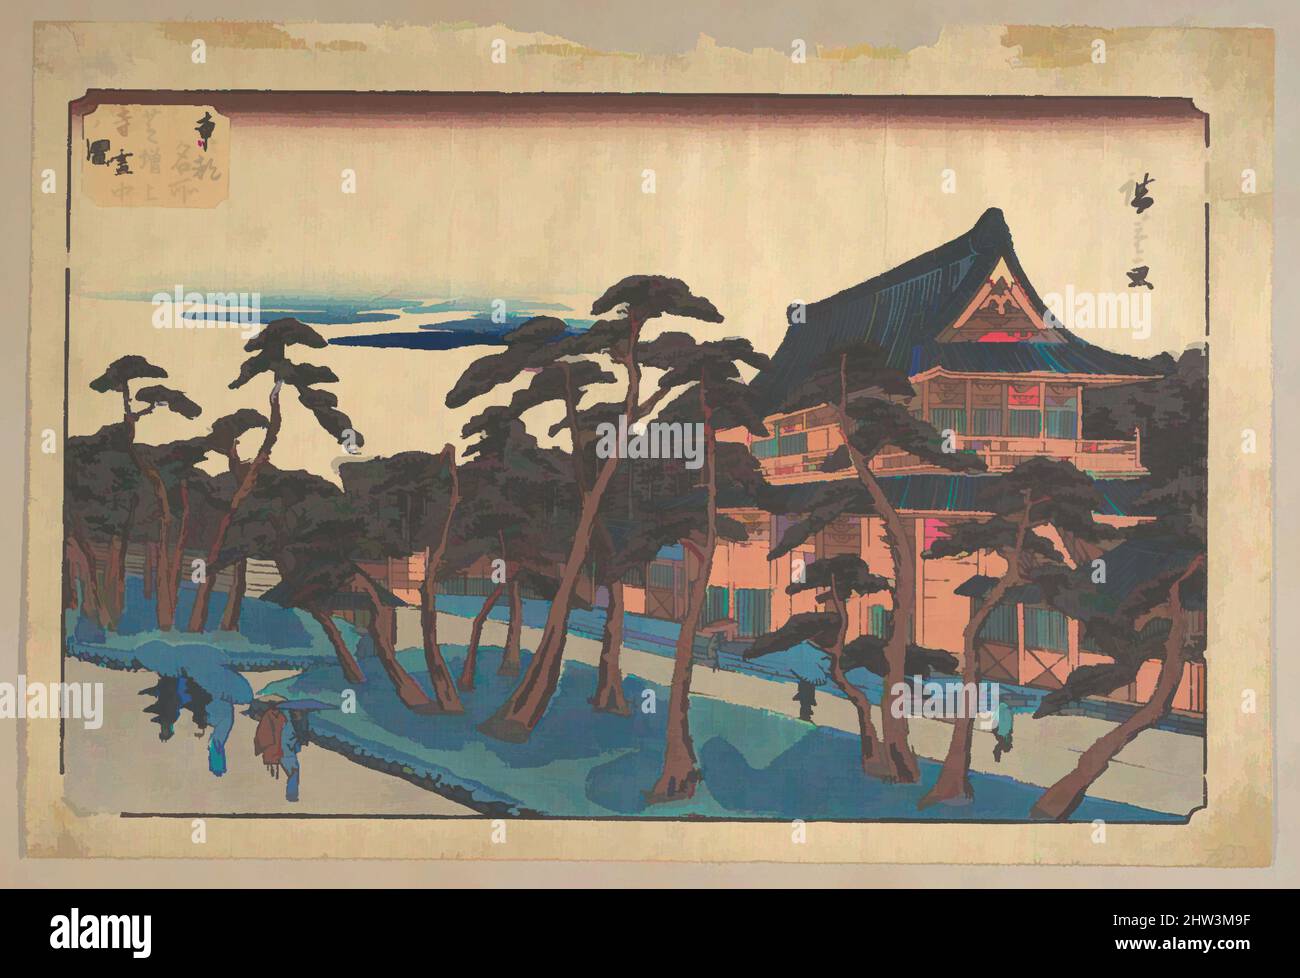 Art inspired by 東都名所　芝増上寺雪中ノ図, Zojoji Temple at Shiba in Snow, Edo period (1615–1868), Japan, Polychrome woodblock print; ink and color on paper, H. 10 in. (25.4 cm); W. 14 3/4 in. (37.5 cm), Prints, Utagawa Hiroshige (Japanese, Tokyo (Edo) 1797–1858 Tokyo (Edo, Classic works modernized by Artotop with a splash of modernity. Shapes, color and value, eye-catching visual impact on art. Emotions through freedom of artworks in a contemporary way. A timeless message pursuing a wildly creative new direction. Artists turning to the digital medium and creating the Artotop NFT Stock Photo